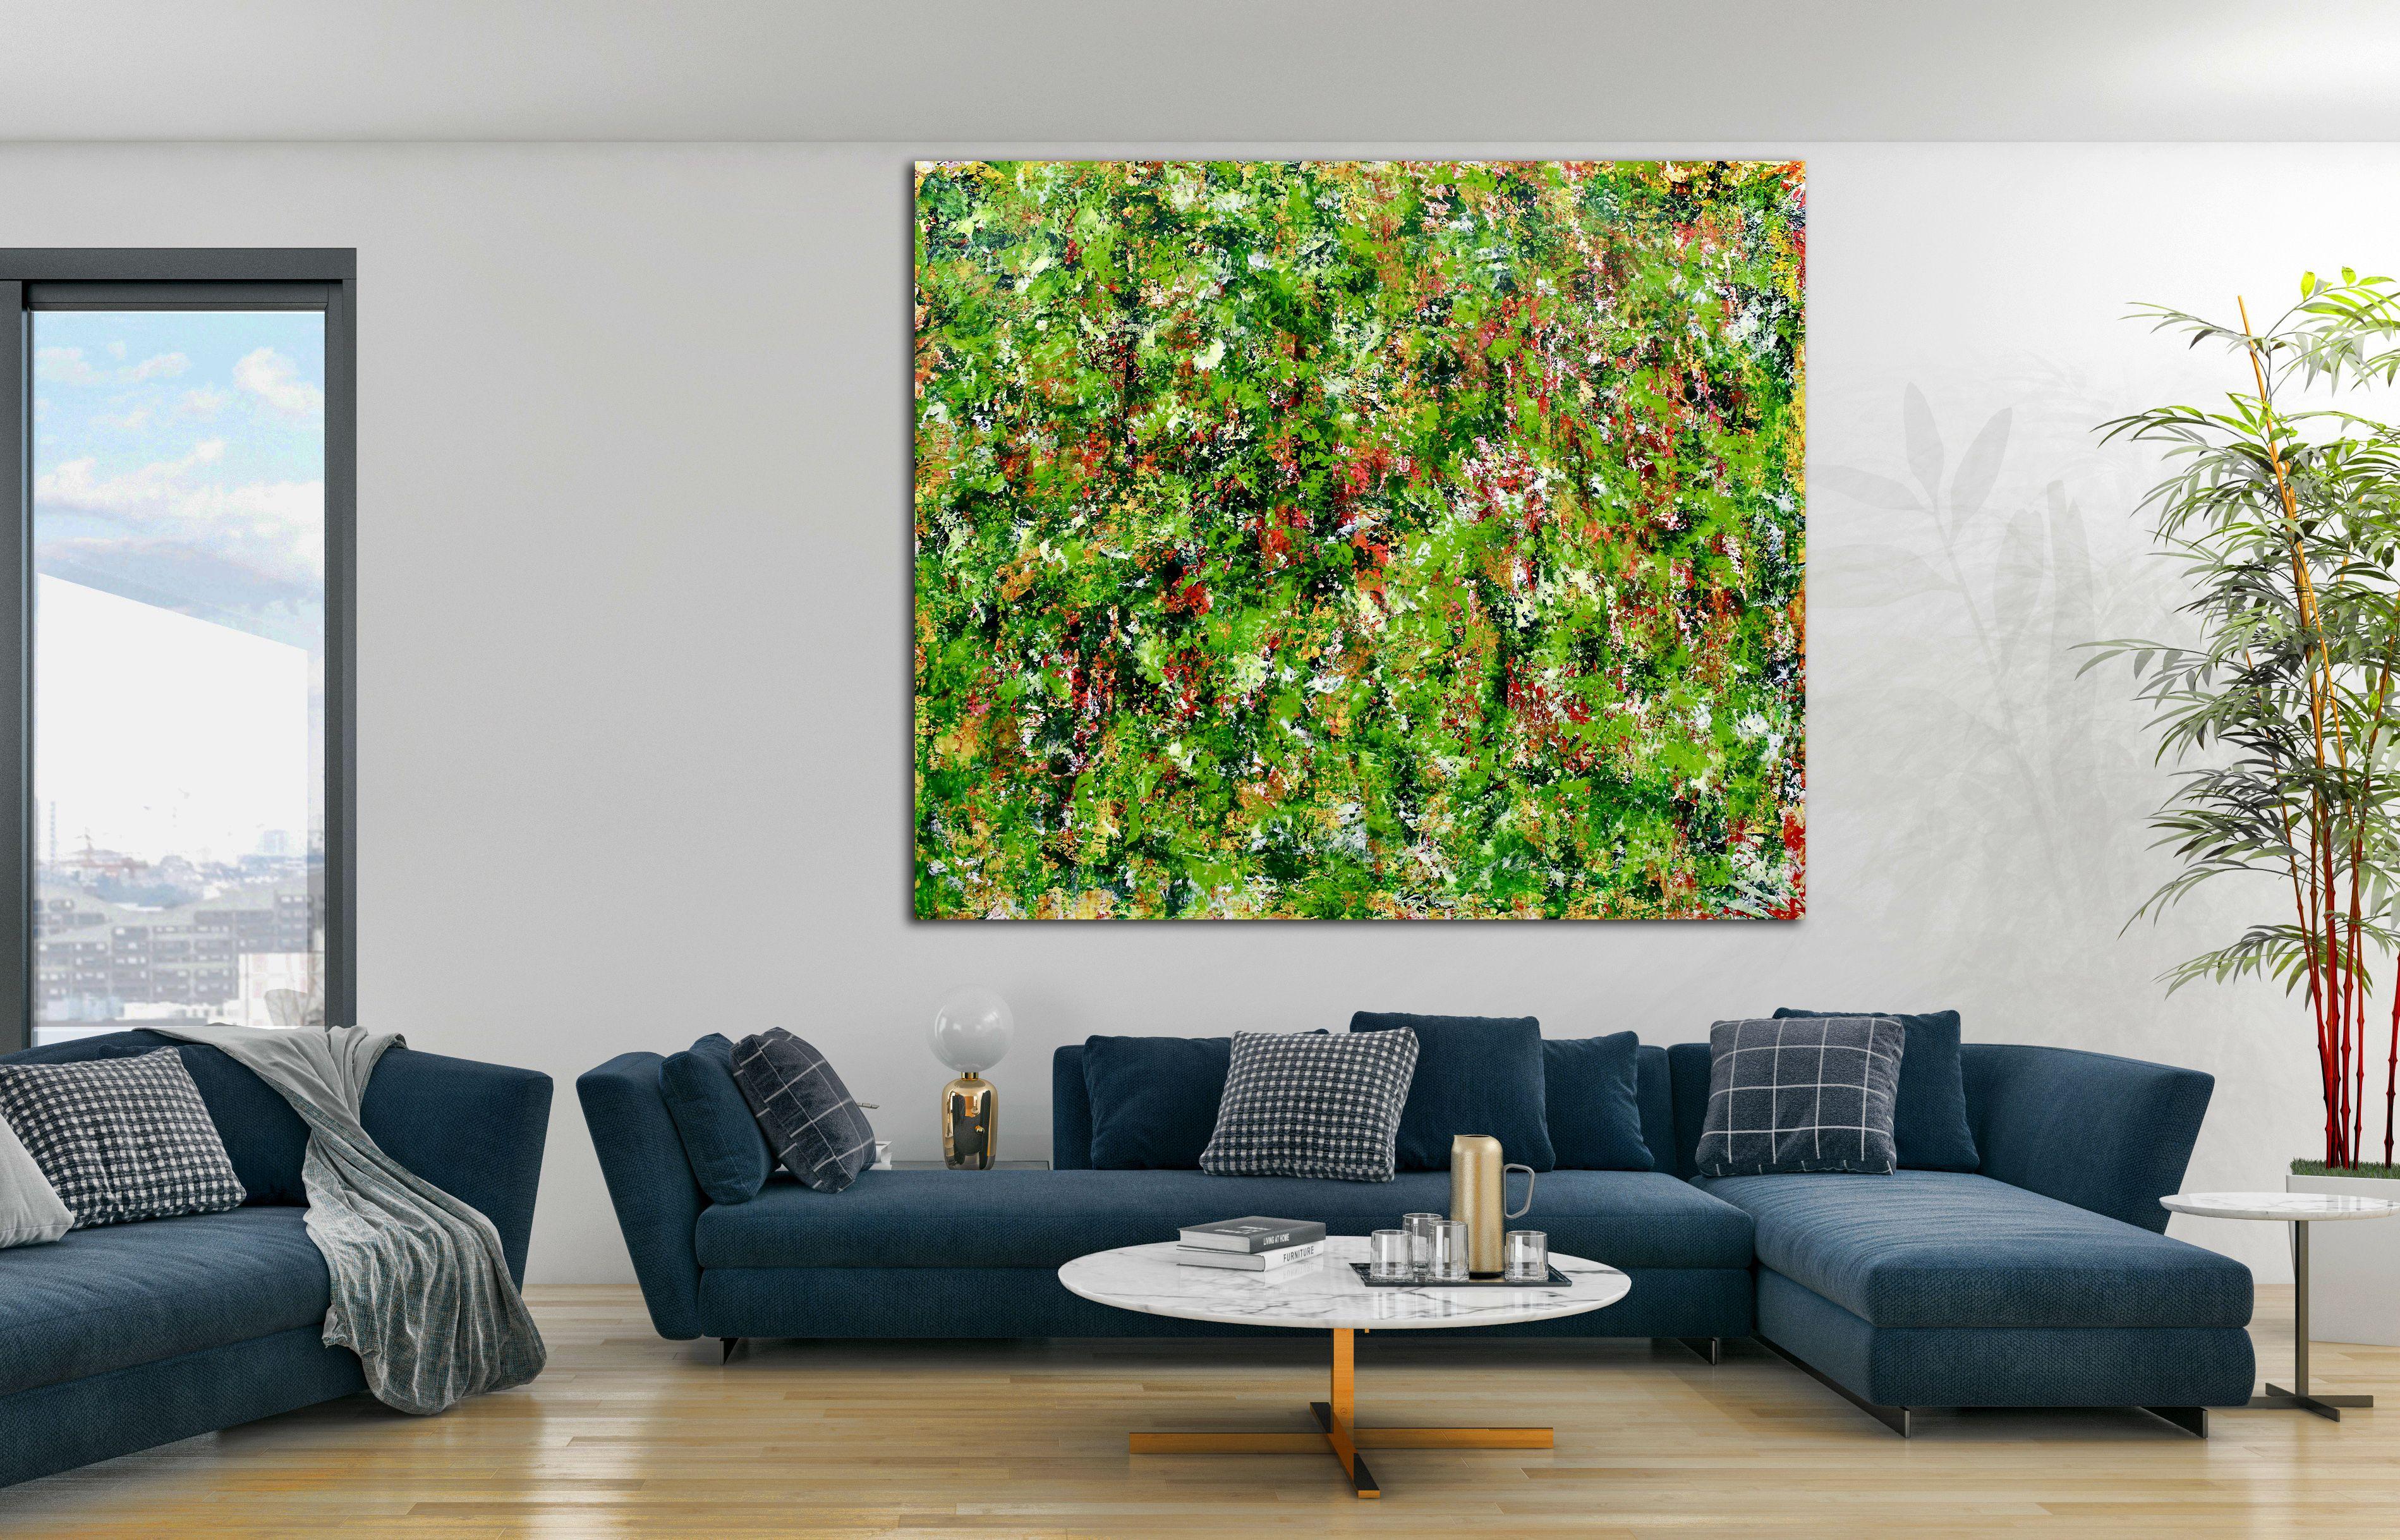 XL abstract painting  Acrylic on canvas    Large impactful abstract piece inspired by nature with shades of green that resemble the tropics and bright undertones, pink, orange, red and gold. Lots of details and intricate palette knife manipulation